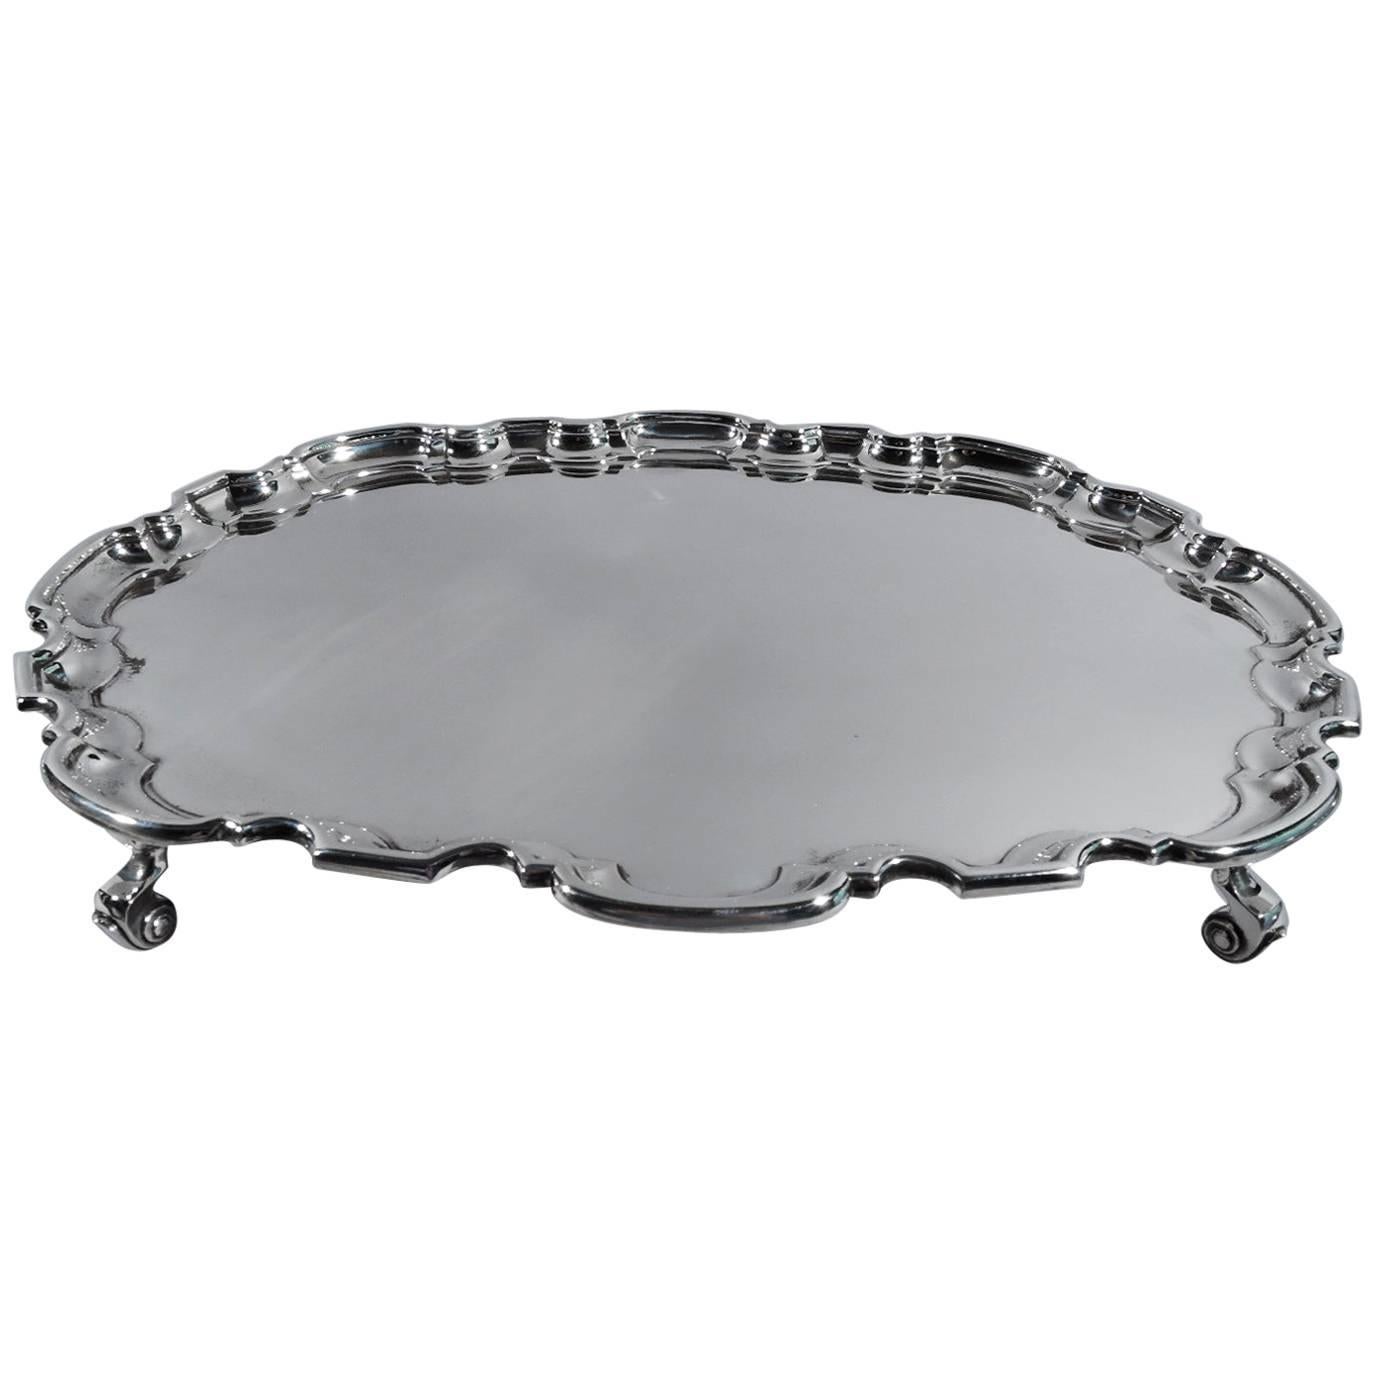 English Sterling Silver Oval Salver Tray with Georgian Piecrust Rim